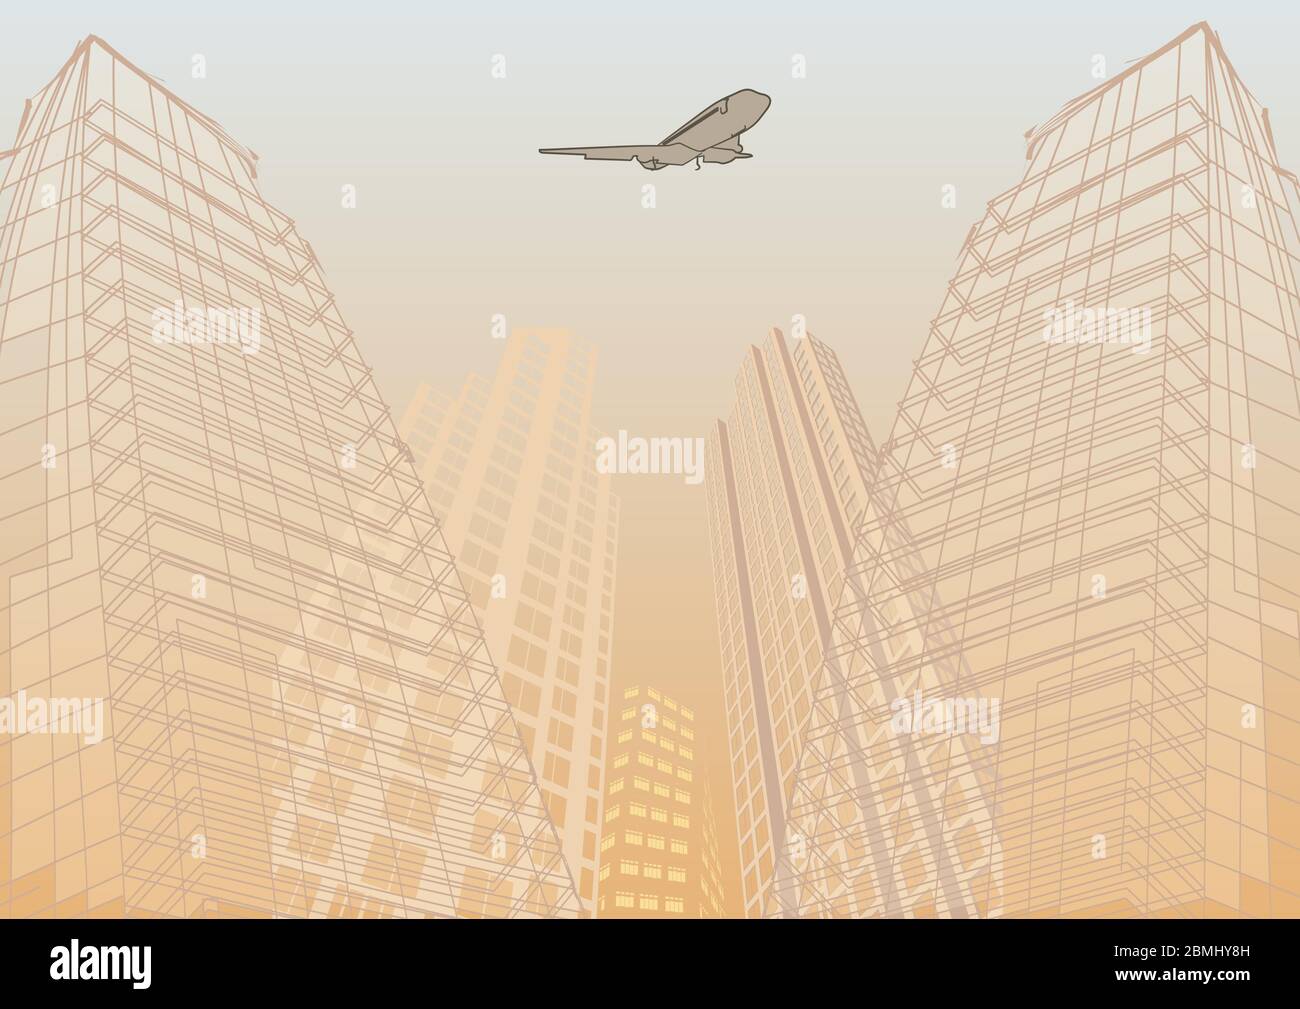 travel by airplane. illustration of airplane flying over sketch of building Stock Vector